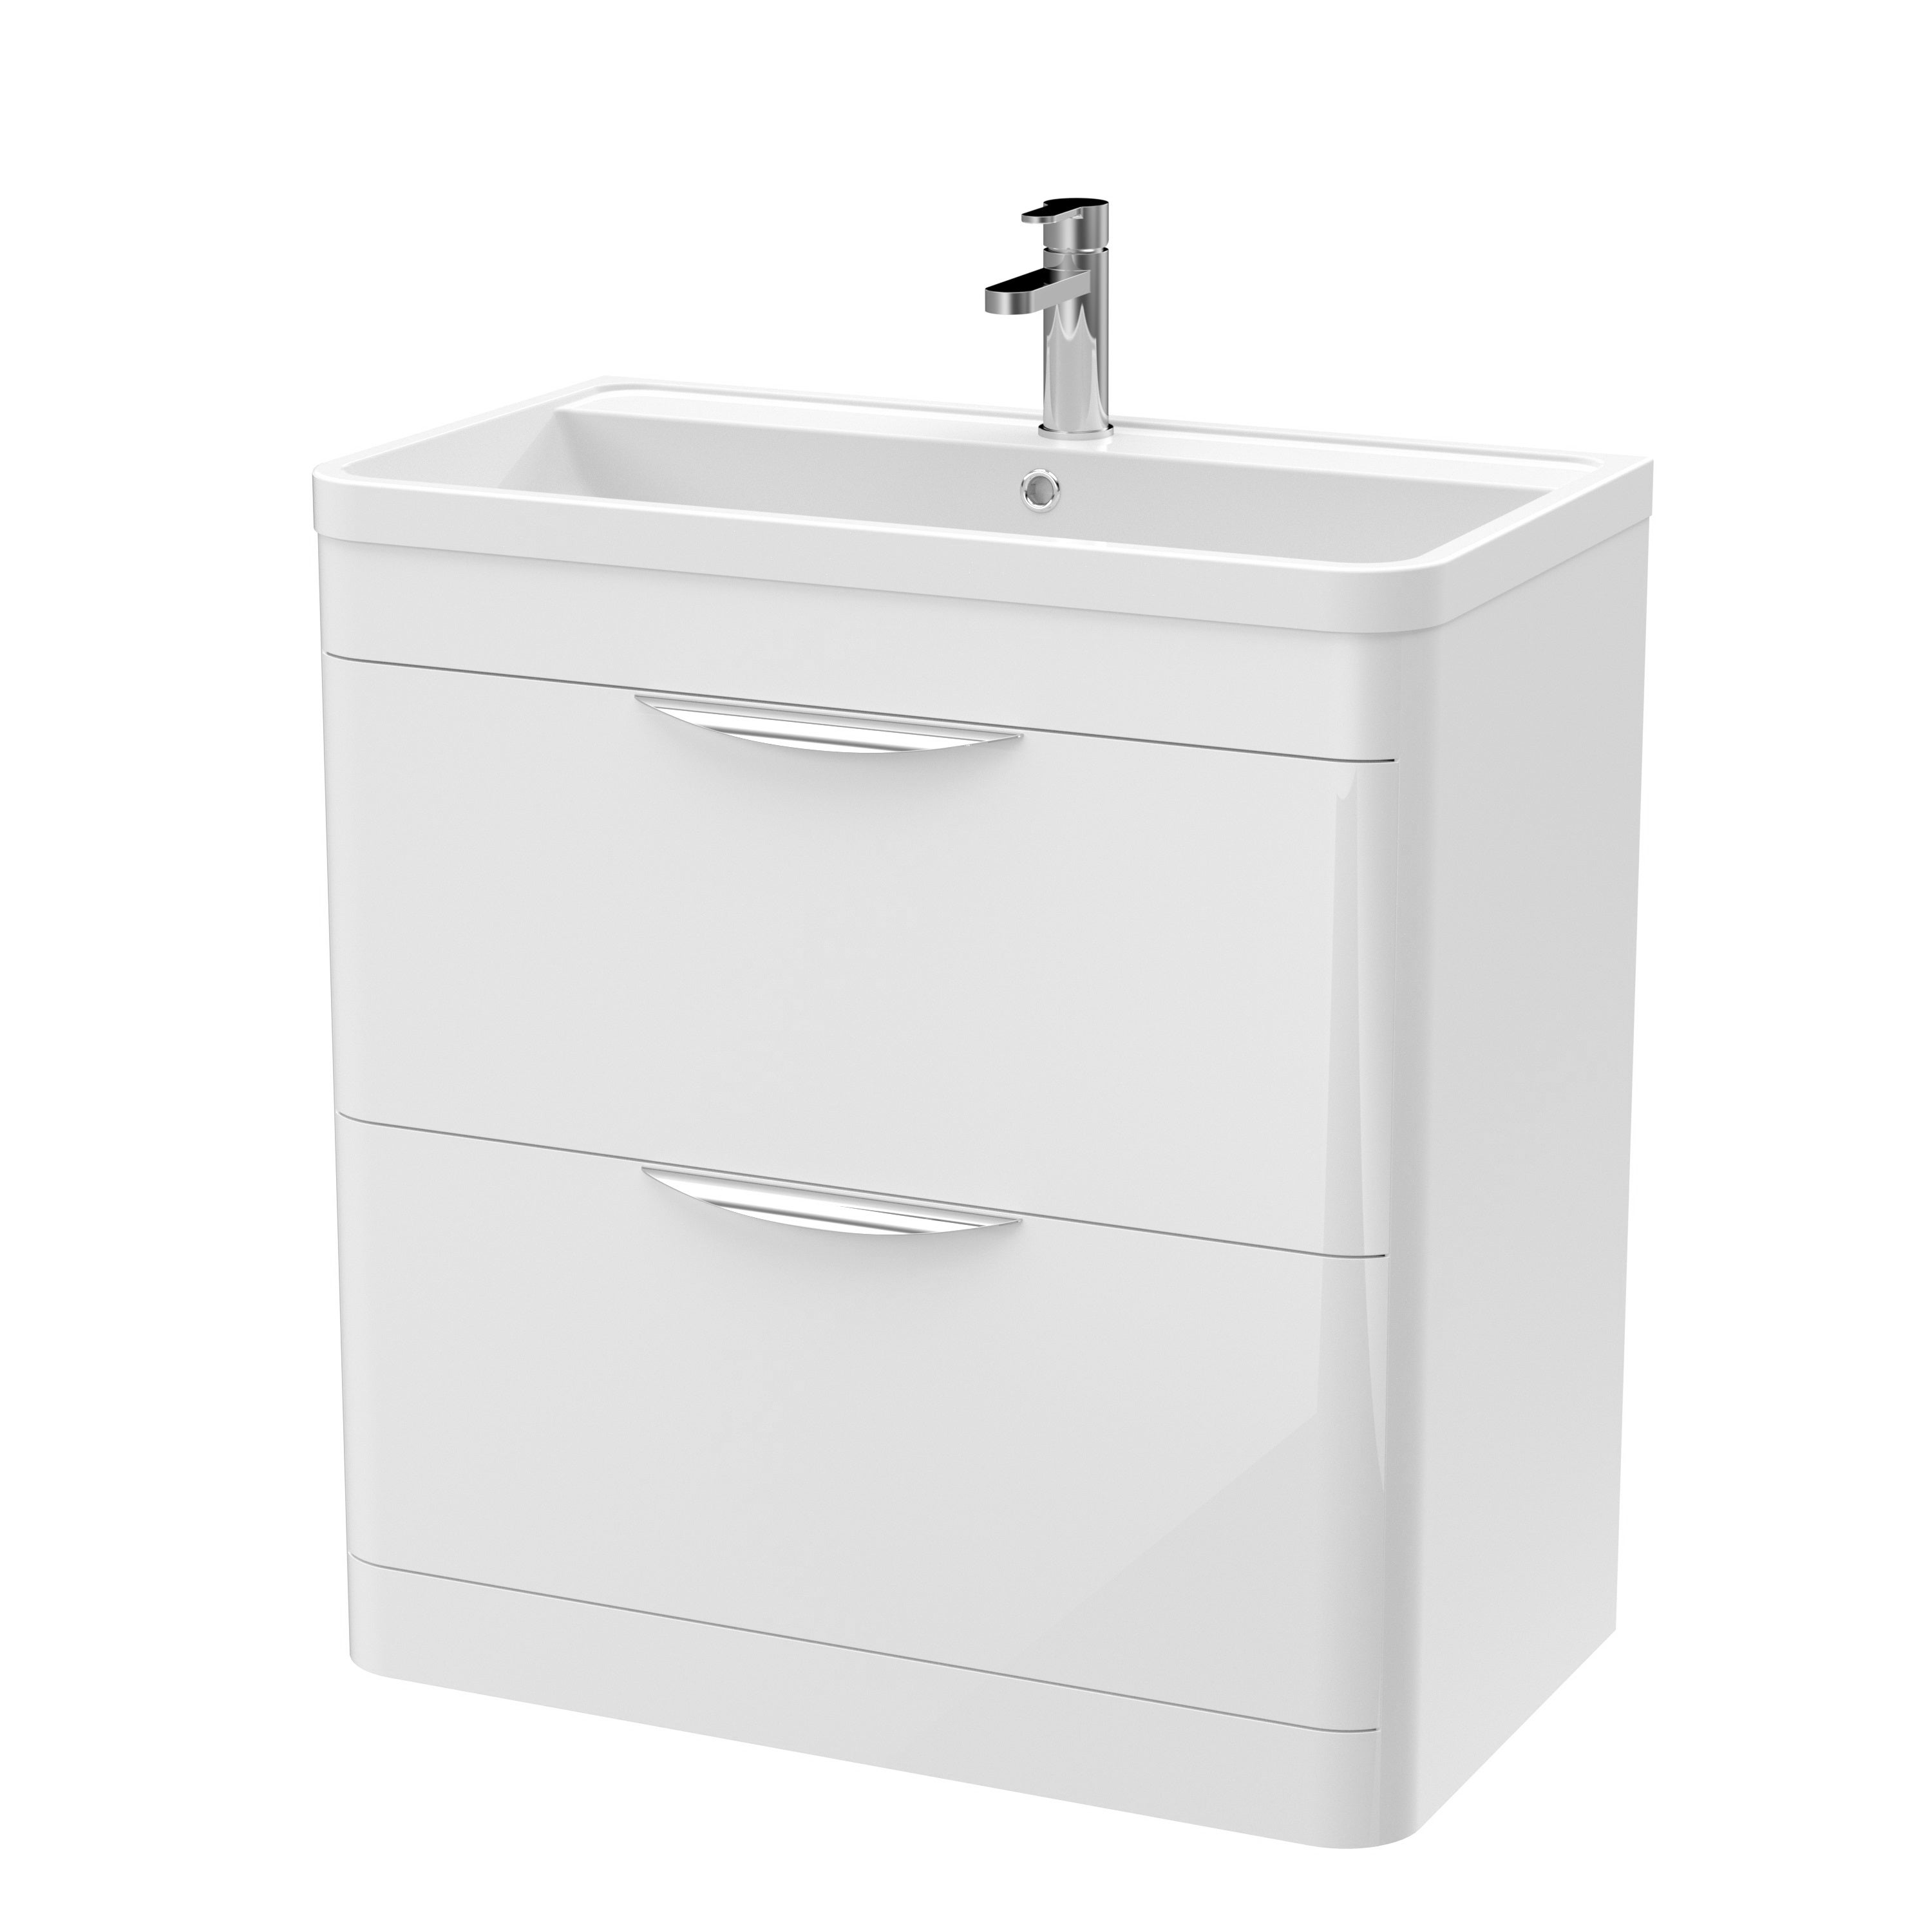 Parade Floor Standing Vanity Unit with Polymarble Basin